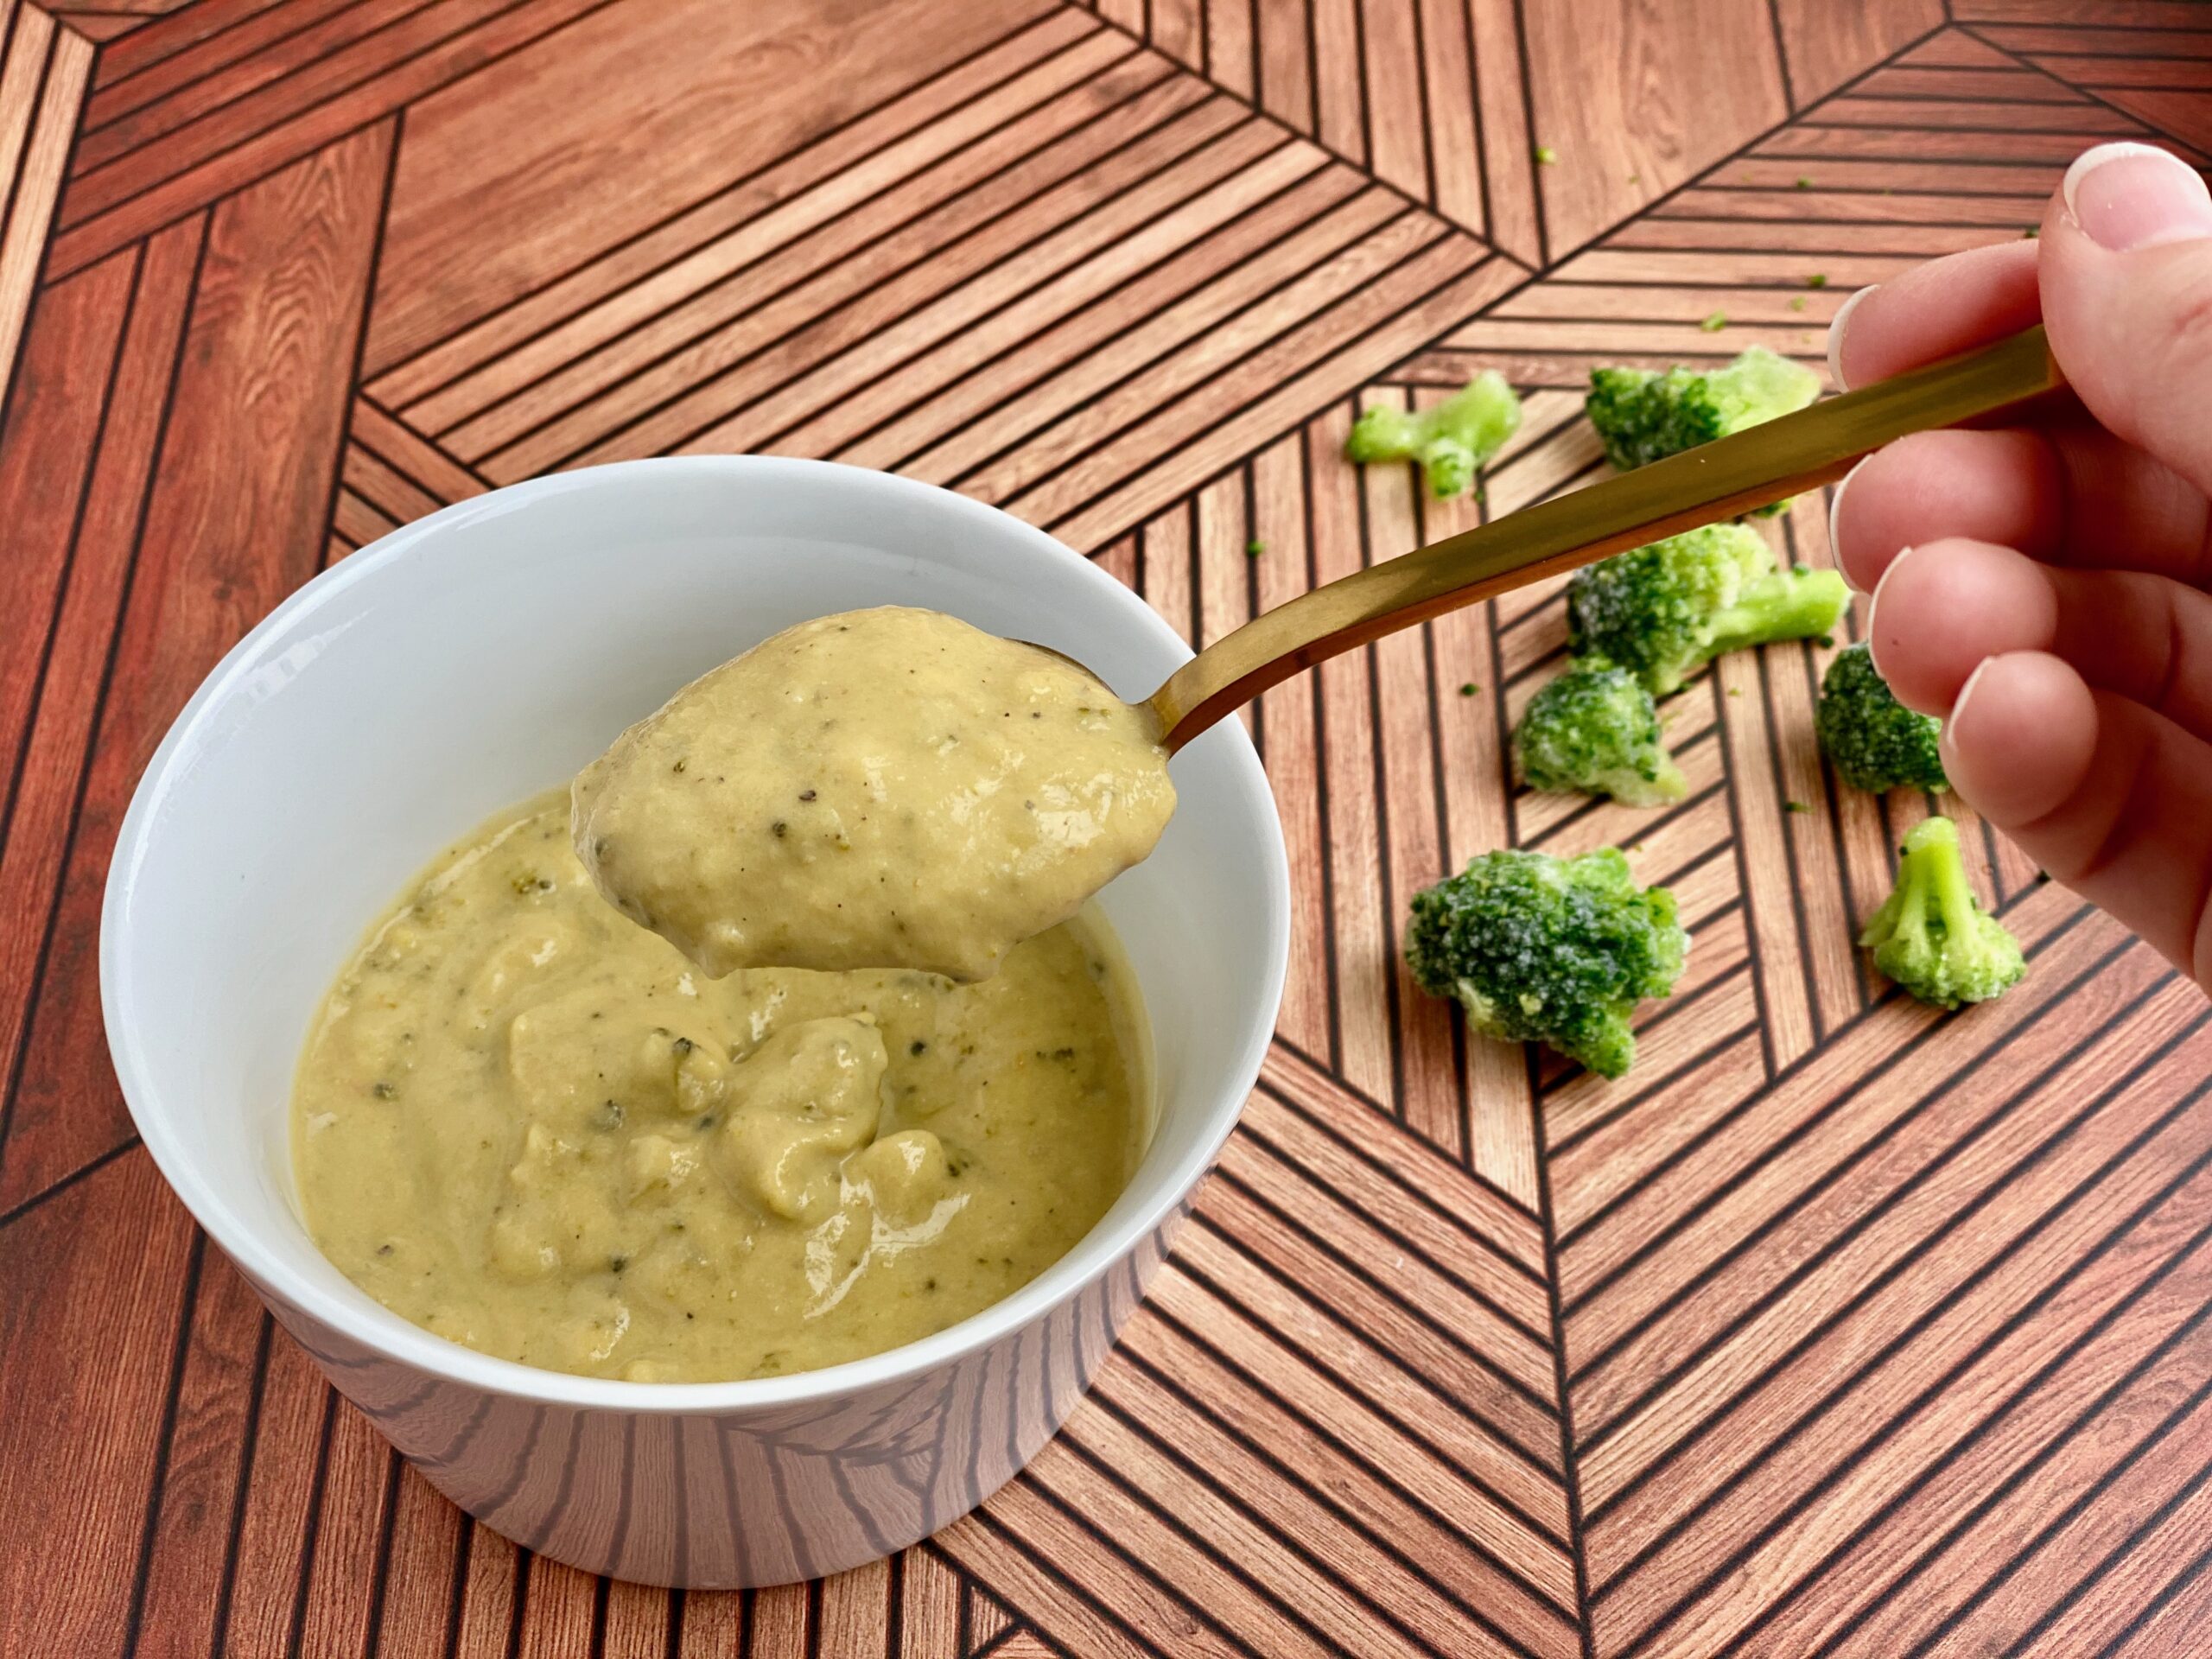 Image of a bowl of soup with a bite on a spoon and broccoli in the background